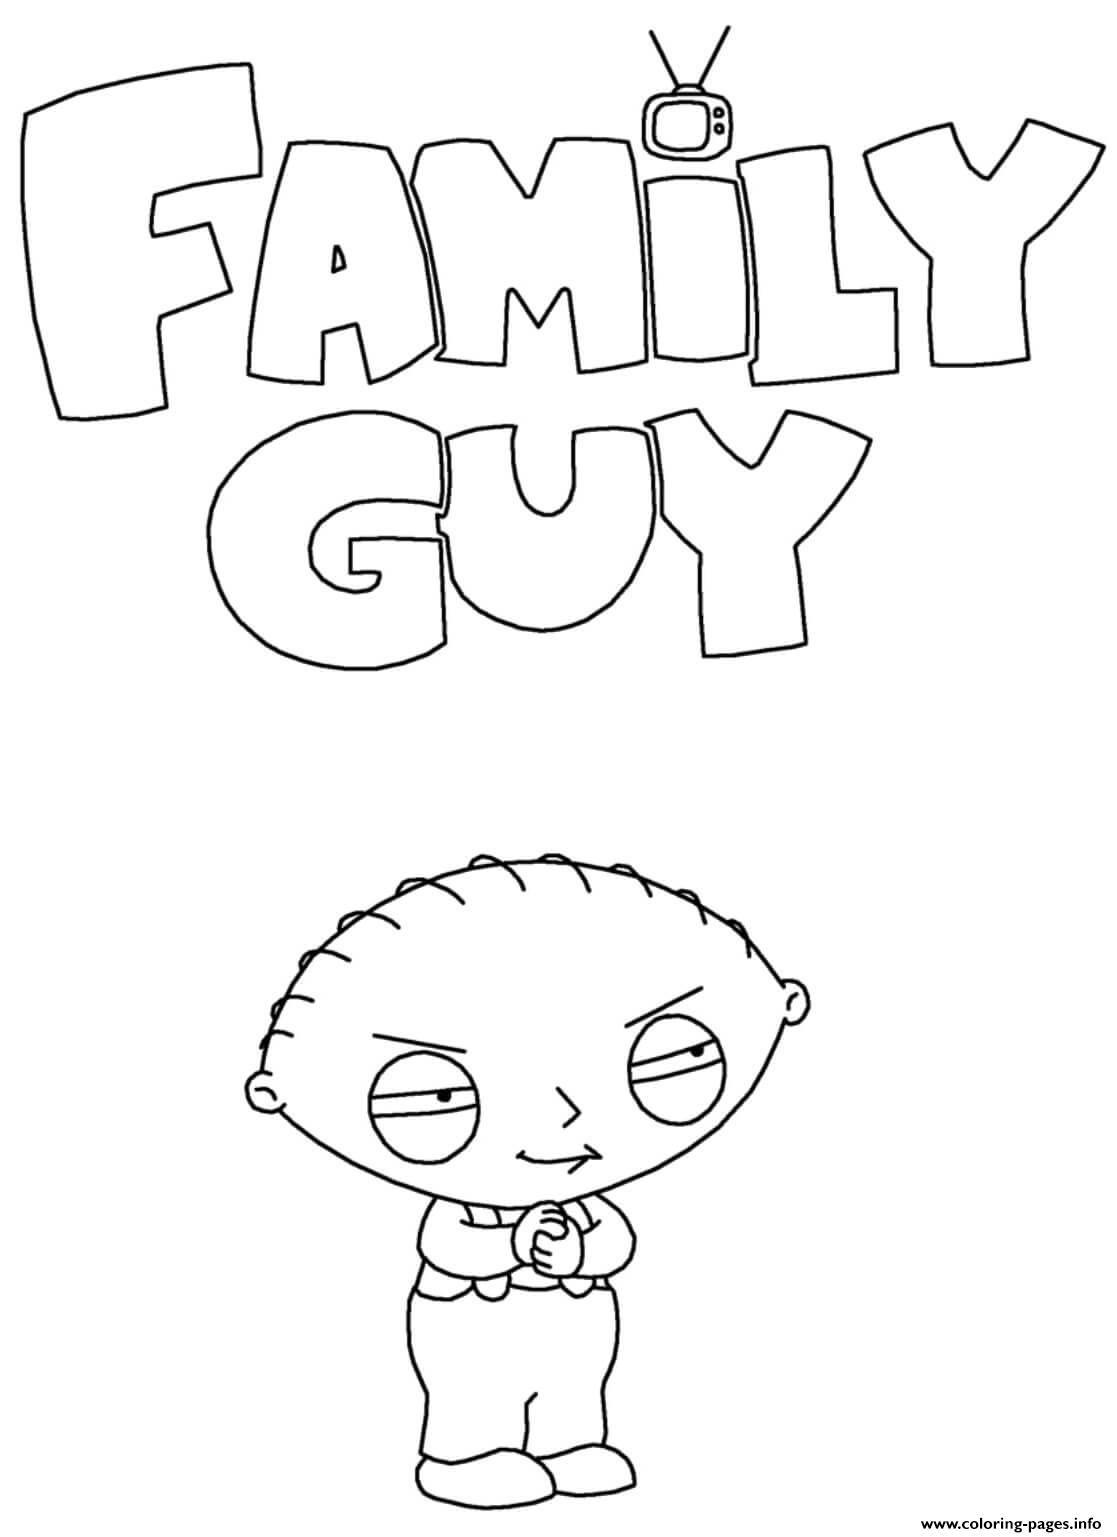 Family guy stewie griffin coloring page printable